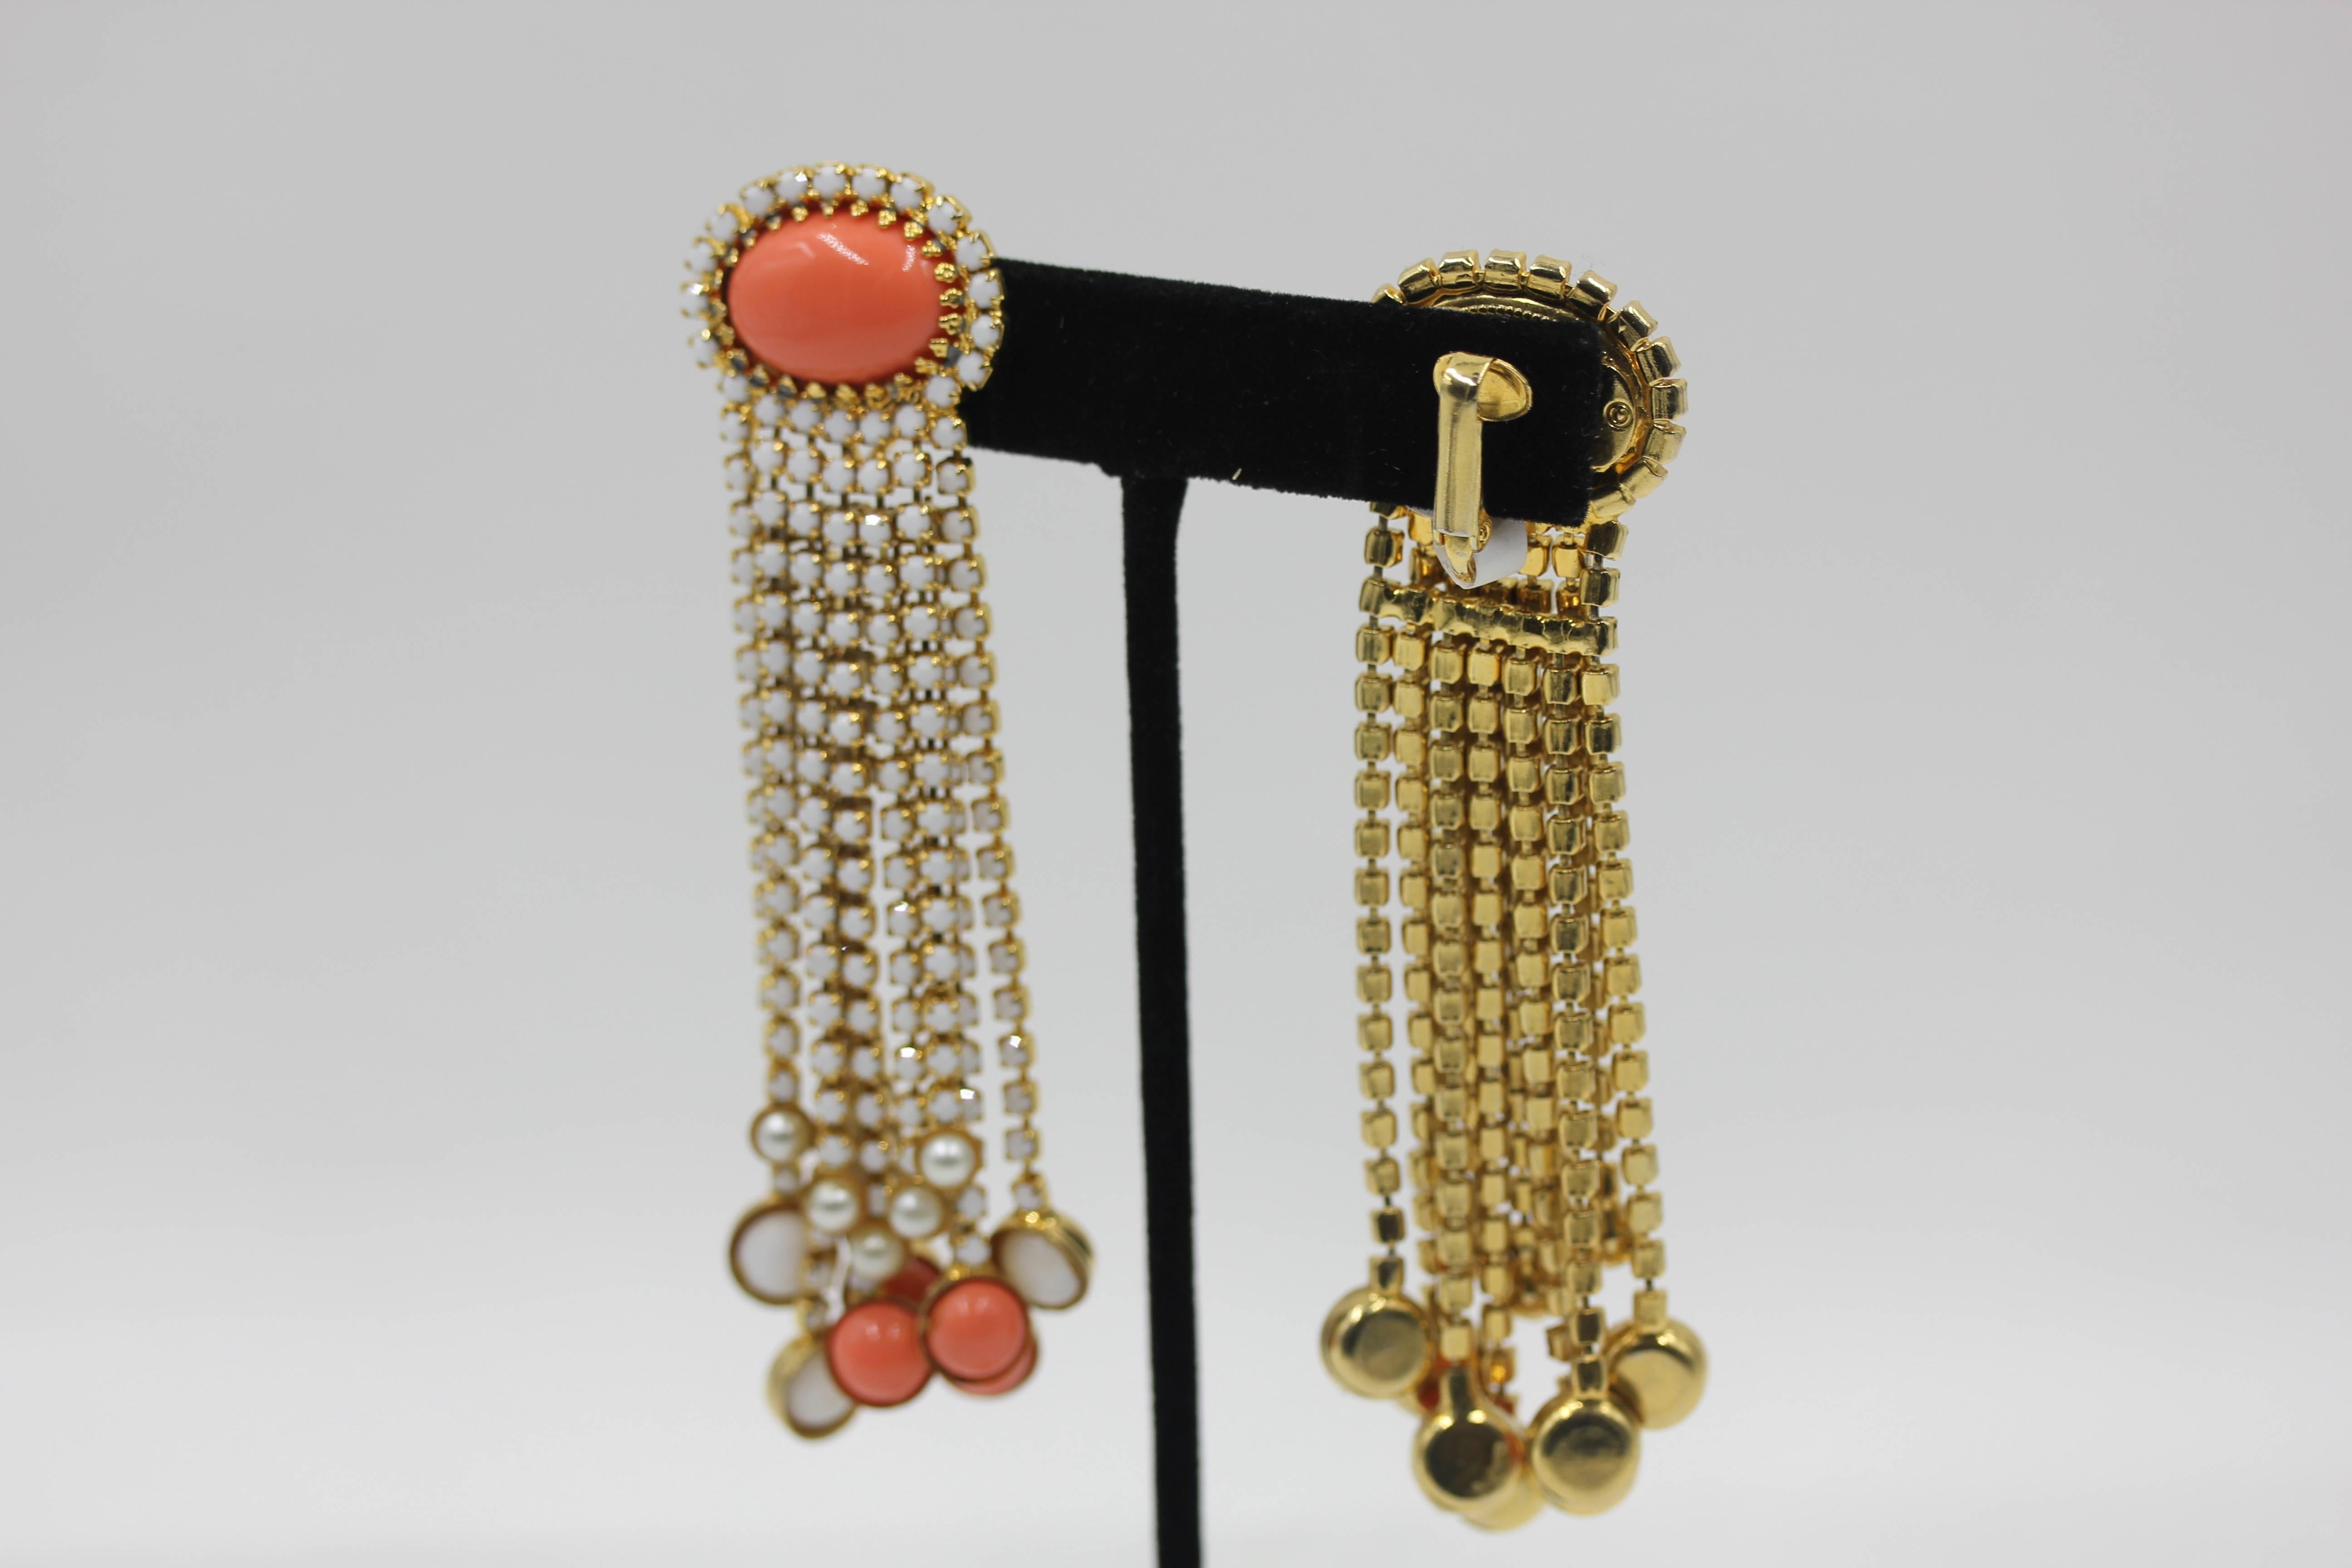 Pristine Condition KJL Kenneth J Lane Vintage Long  Dangle Earrings .Faux Pearl,coral resin , and white strass, Oval ear piece with 12 gold metal strass set fringes. fabulous piece. Ear piece is 1 inch by 3/4